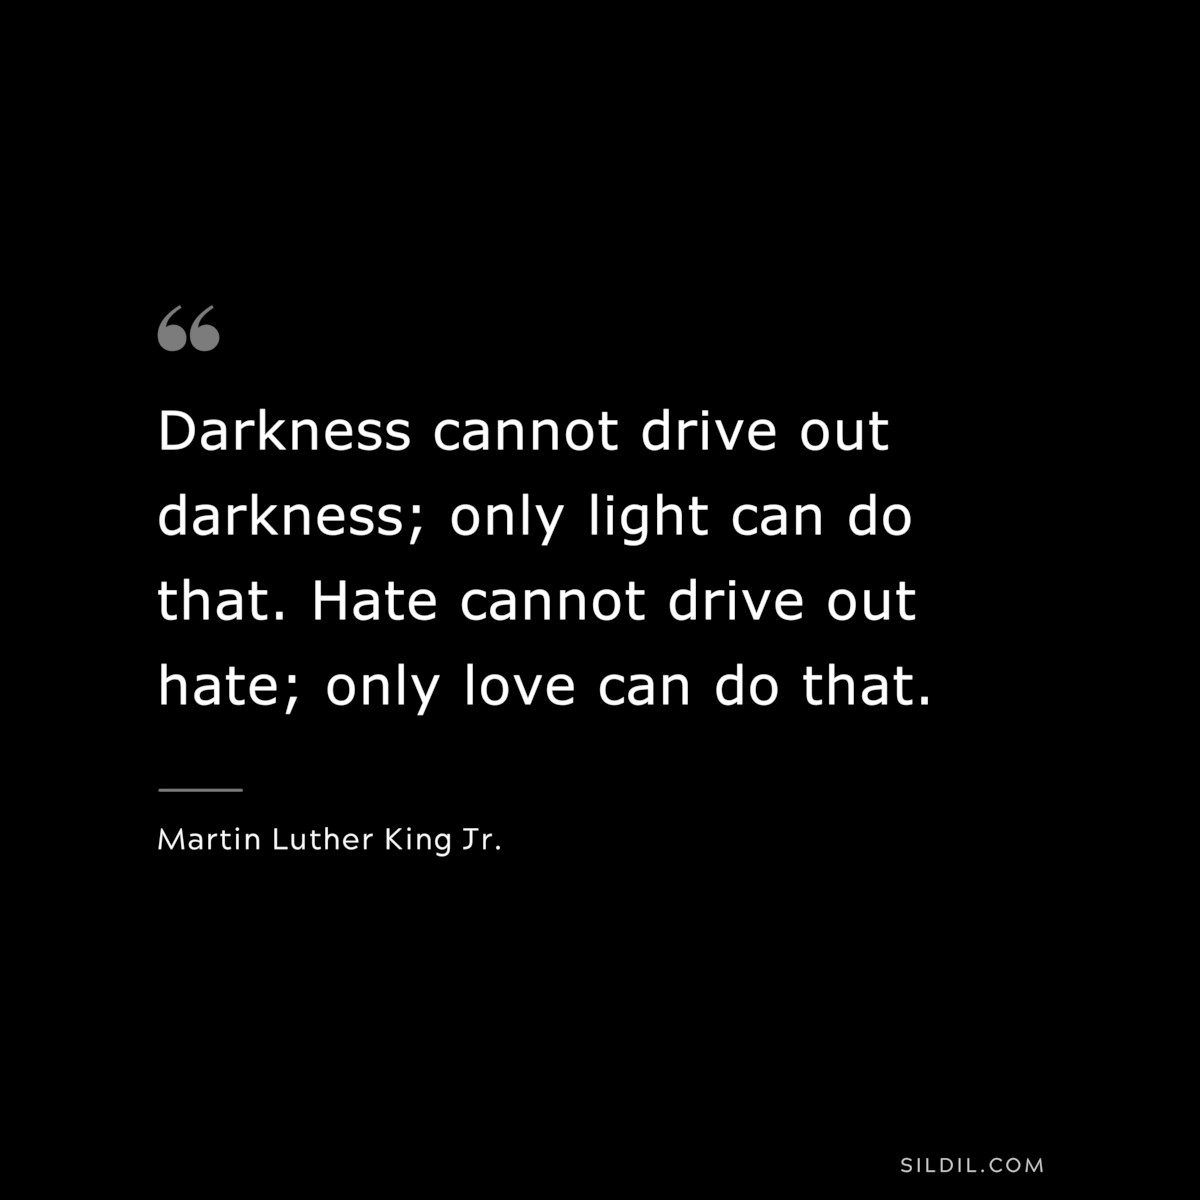 Darkness cannot drive out darkness; only light can do that. Hate cannot drive out hate; only love can do that. ― Martin Luther King Jr.